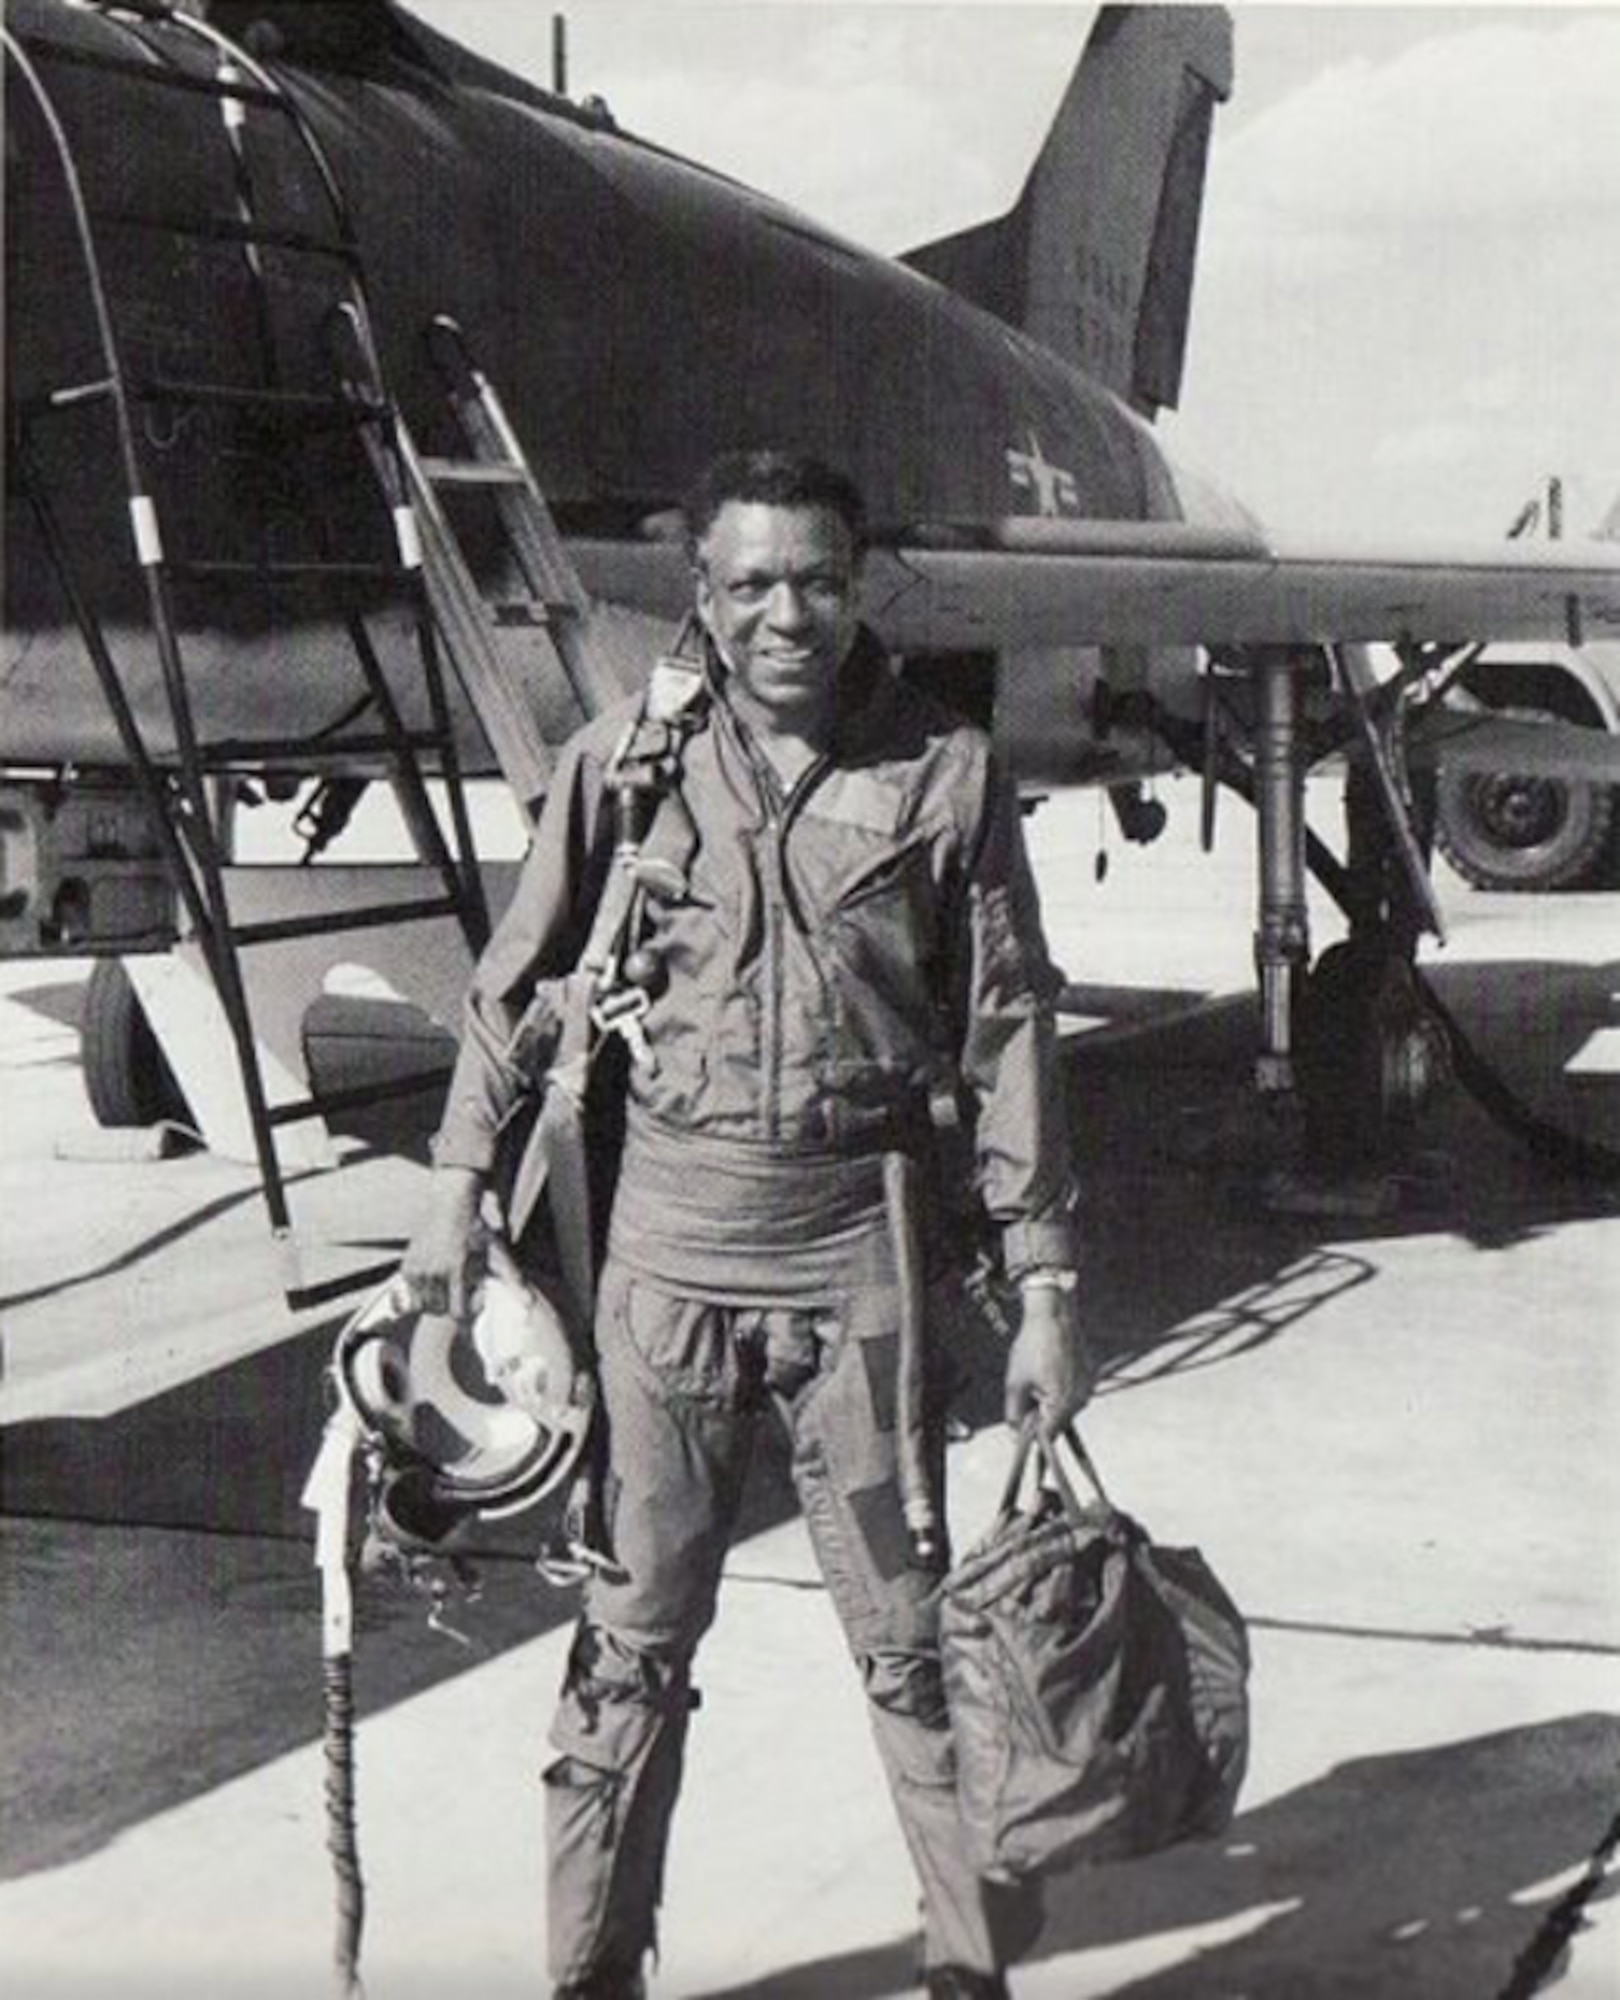 Artist Roy LaGrone, who depicted the Tuskegee Airmen through illustrations, was himself one of the group during World War II.